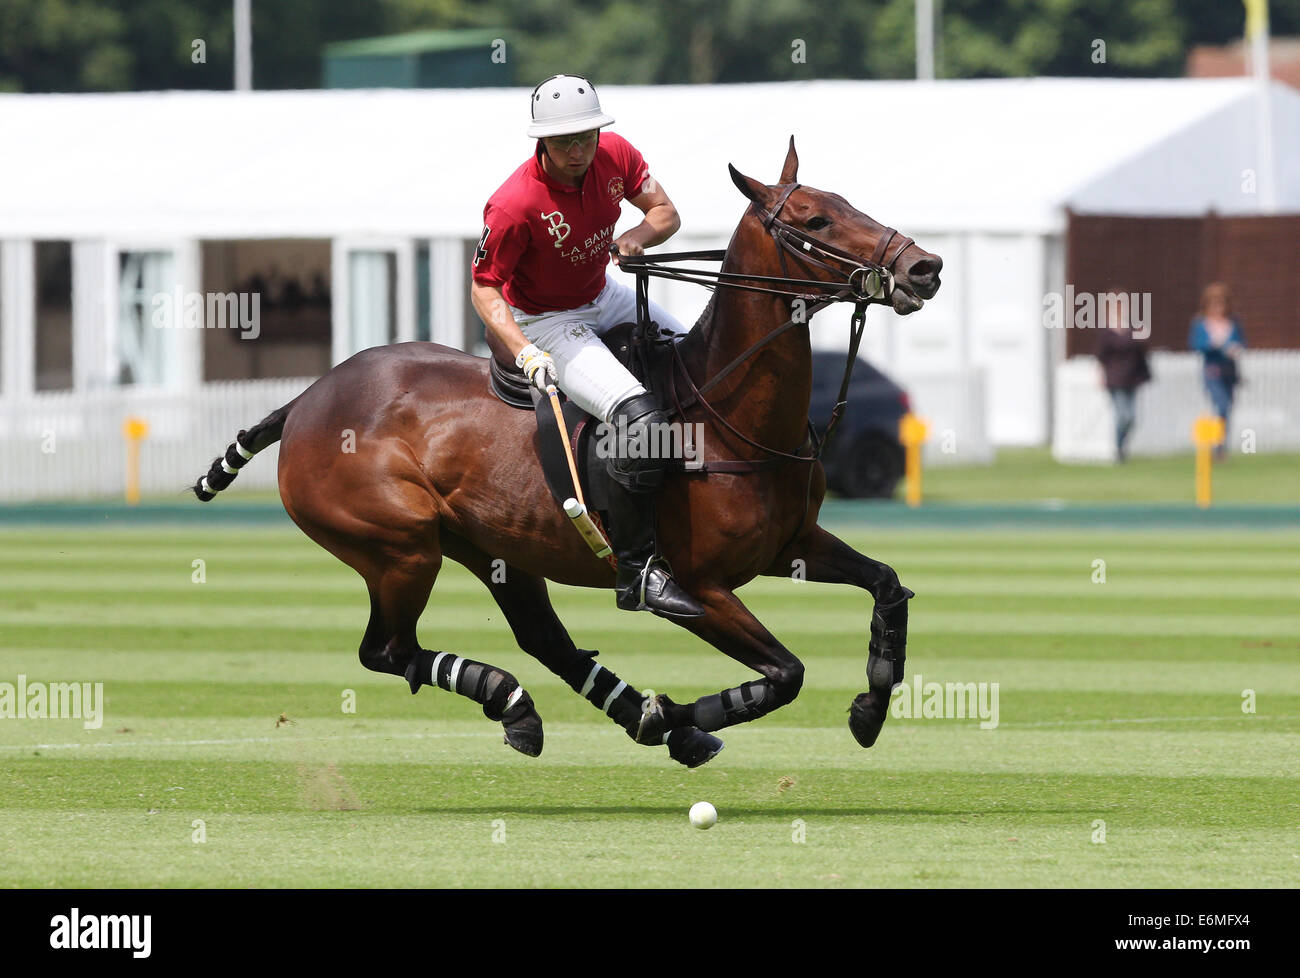 Ollie Cudmore of La Bamba De Areco Polo team plays in the 2013 Veuve Clicquot Polo Gold cup, at Cowdray Park Polo Club Stock Photo